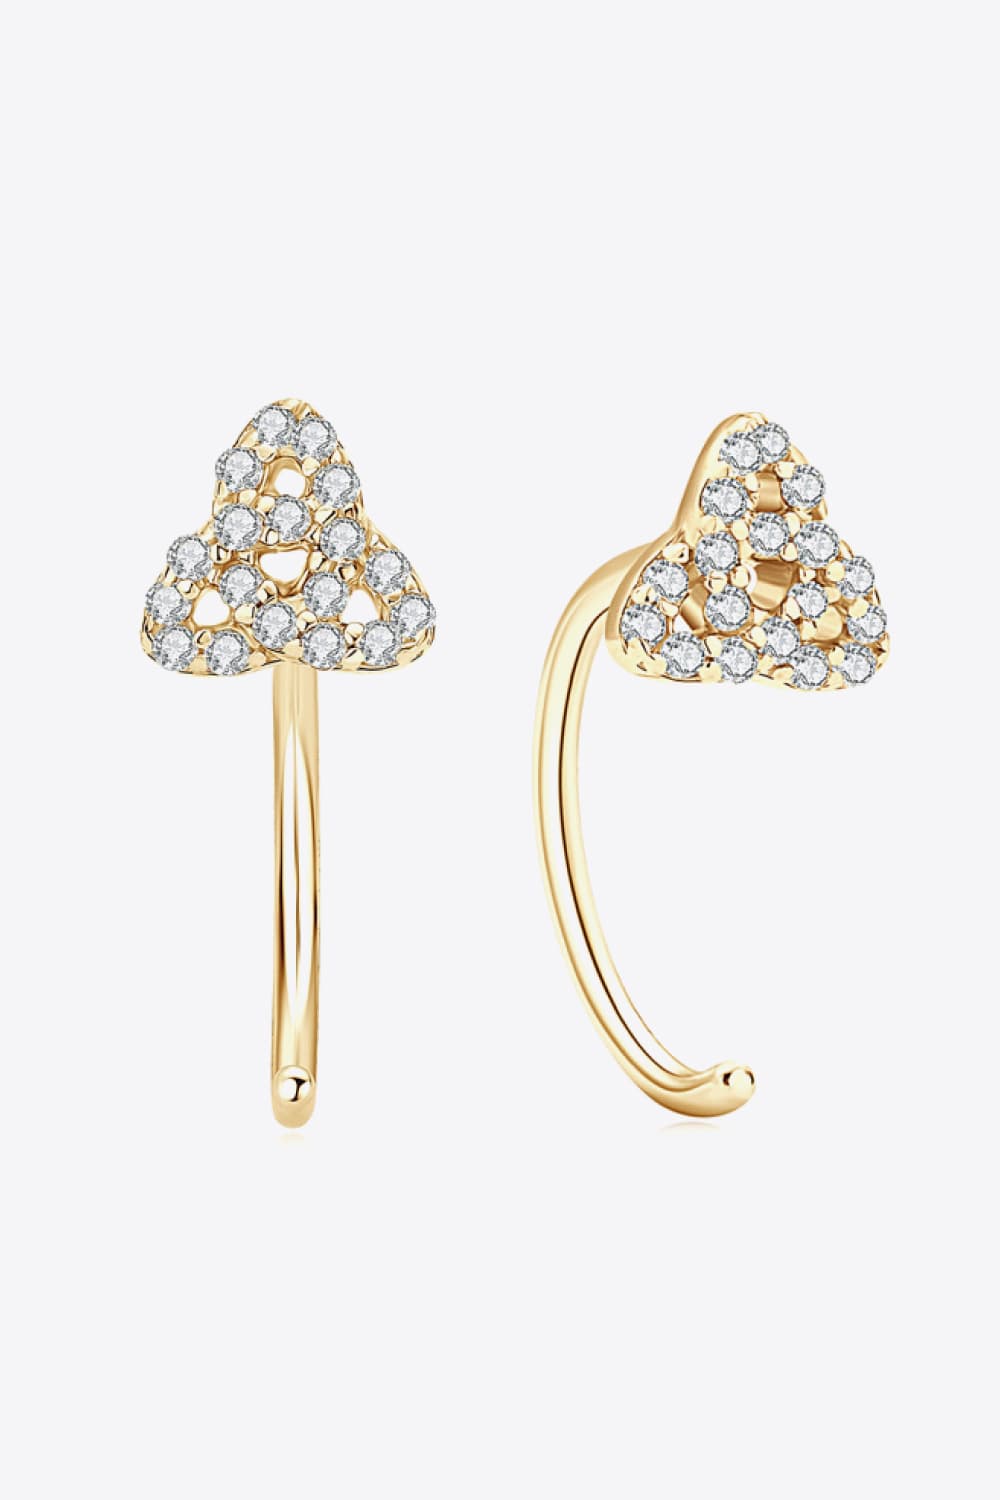 Catch Me If You Can Moissanite Earrings